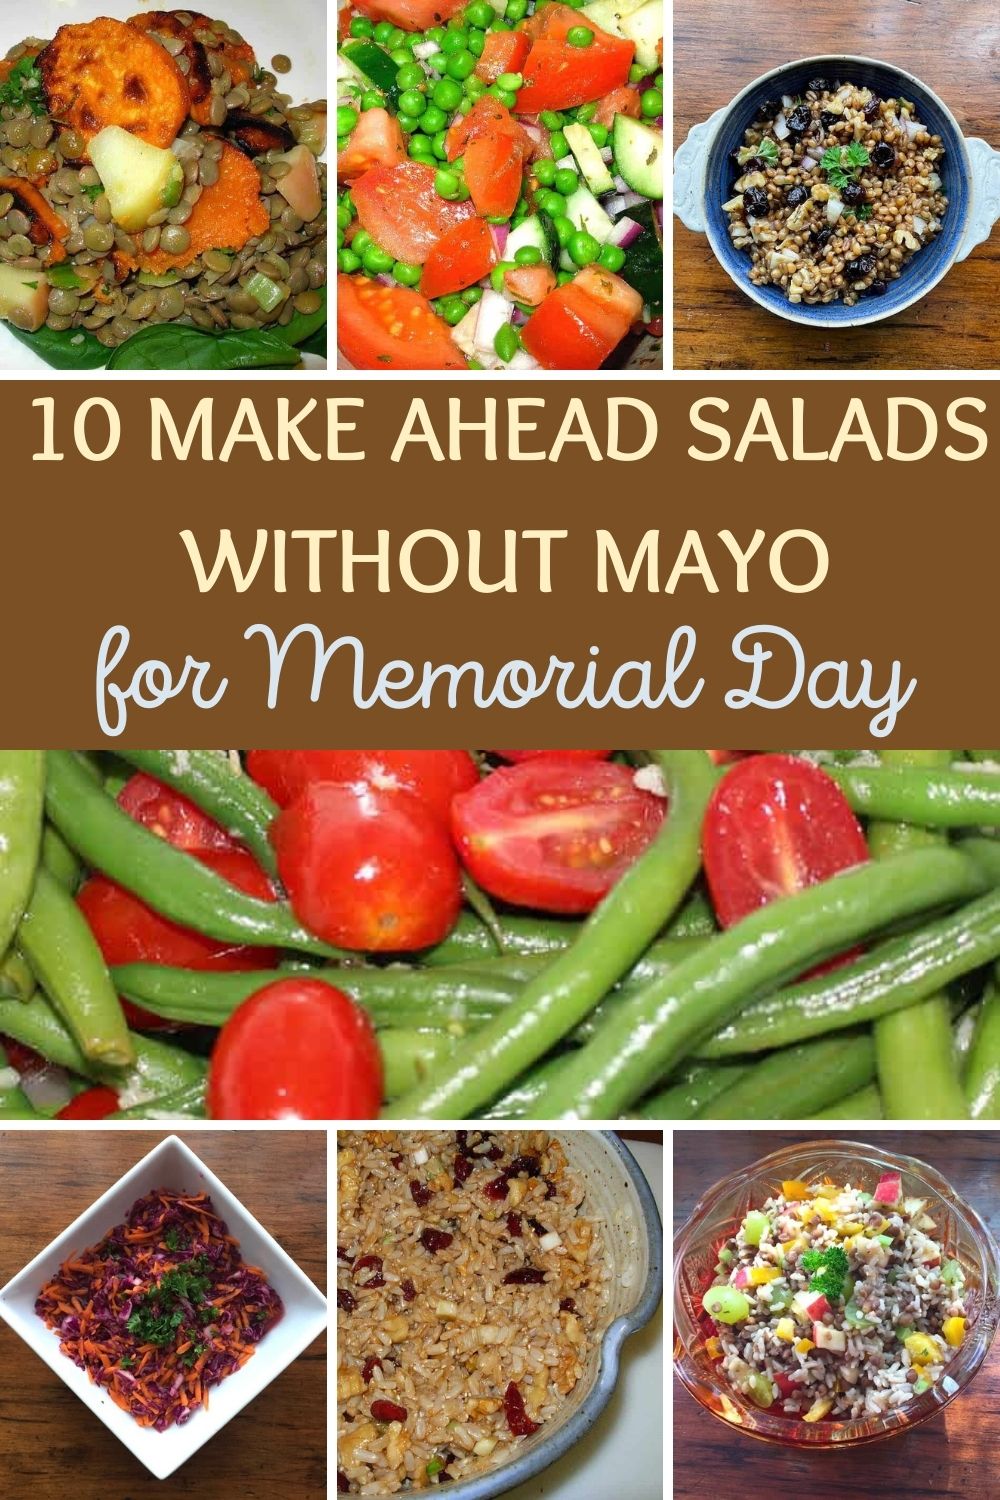 10 Make Ahead Salads Without Mayo for Memorial Day